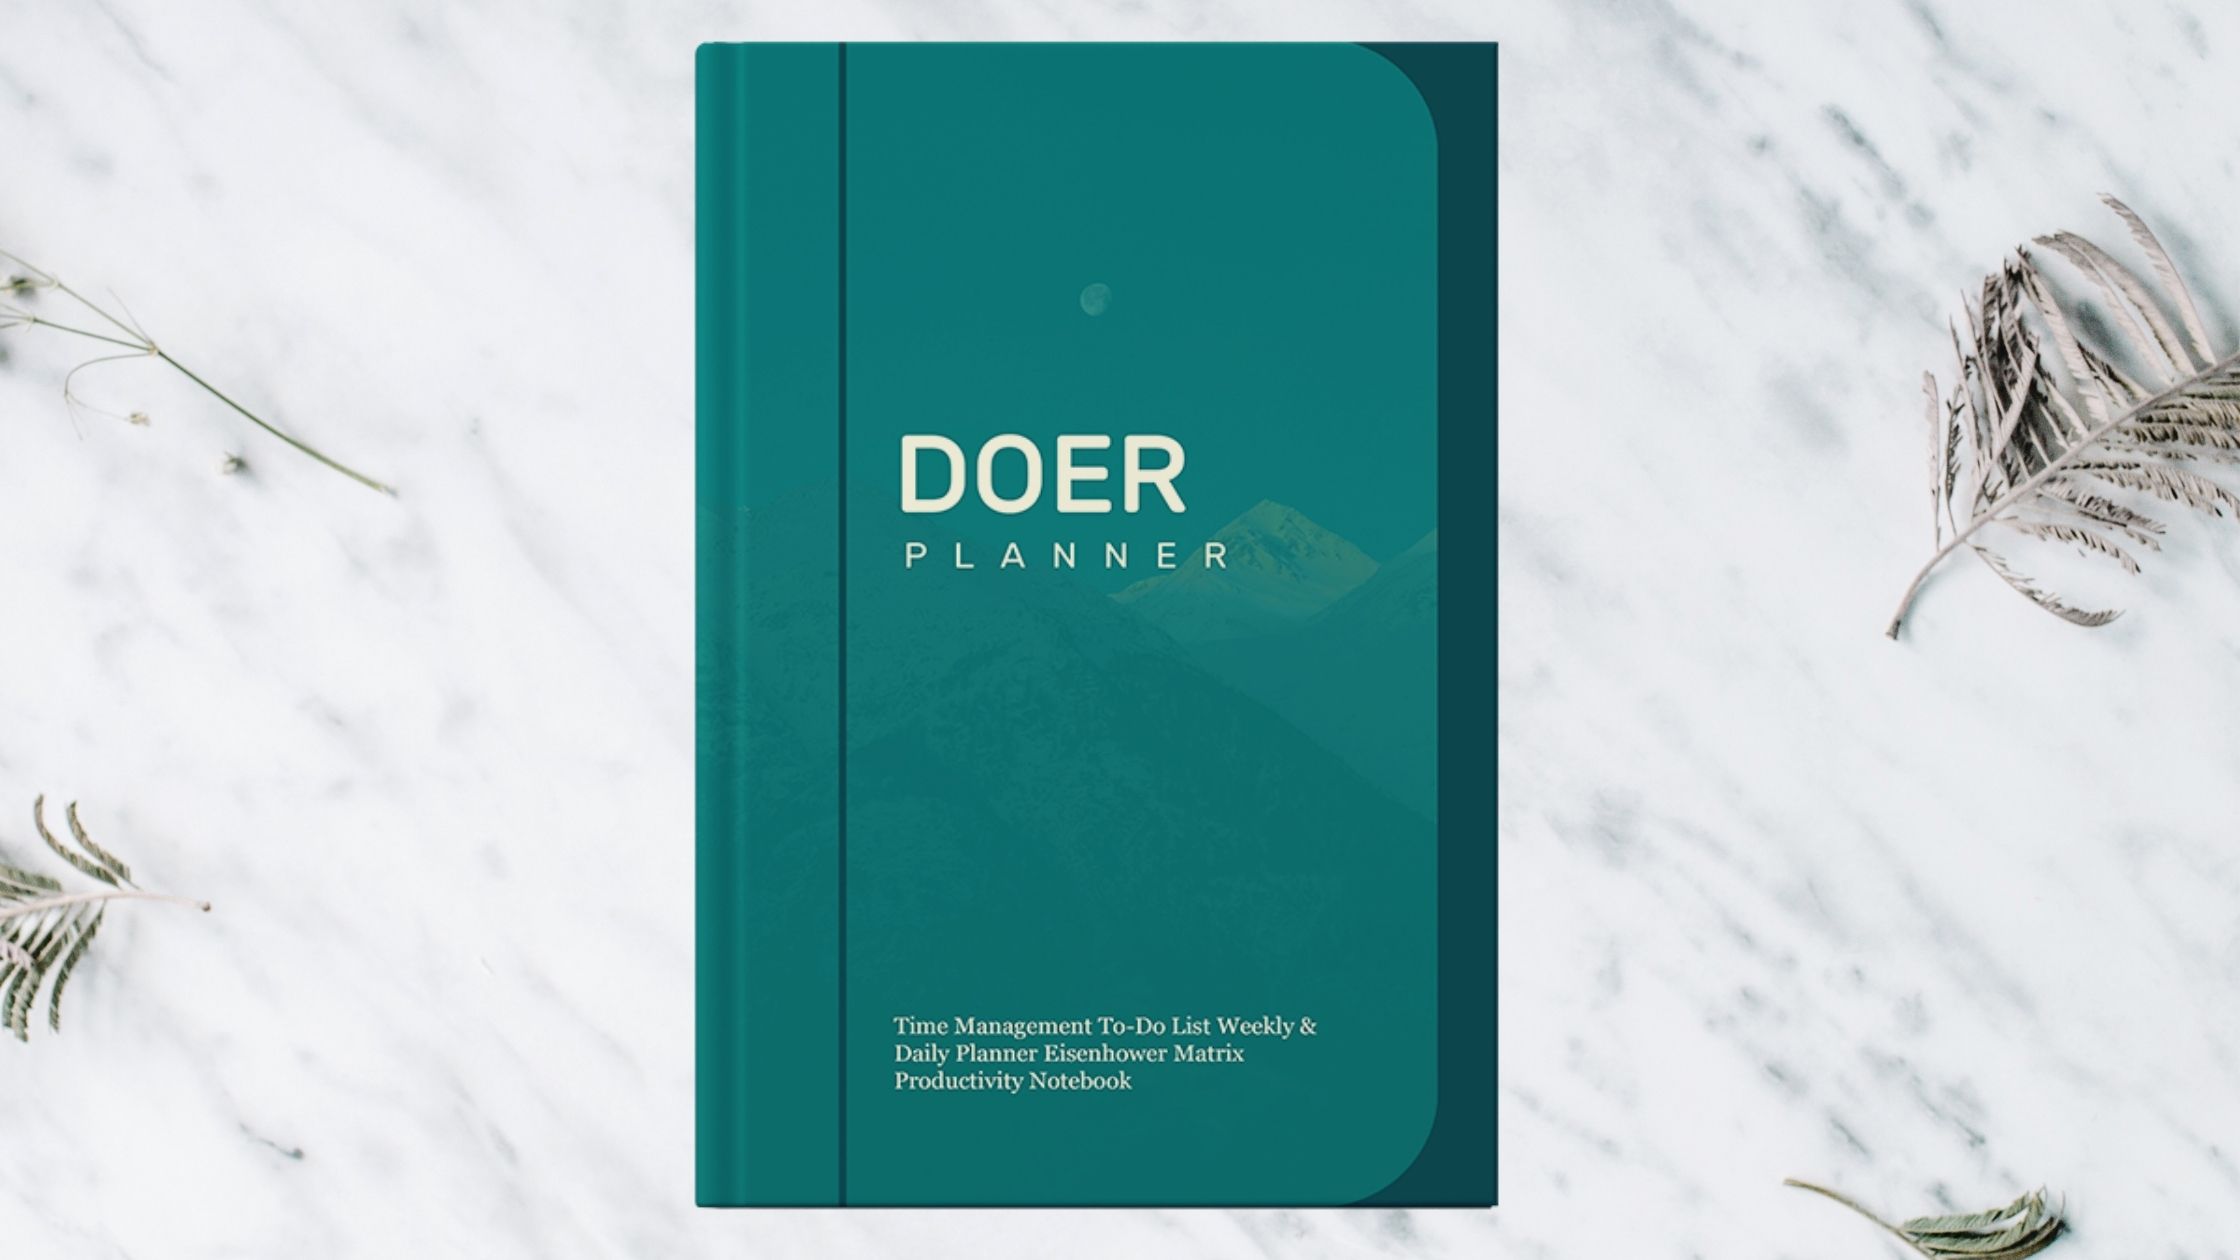 To-Do daily Planner. It's simple, effective, and will make your life a whole lot easier. By knowing the tasks you need to do and when, you'll be able to plan your days more efficiently.